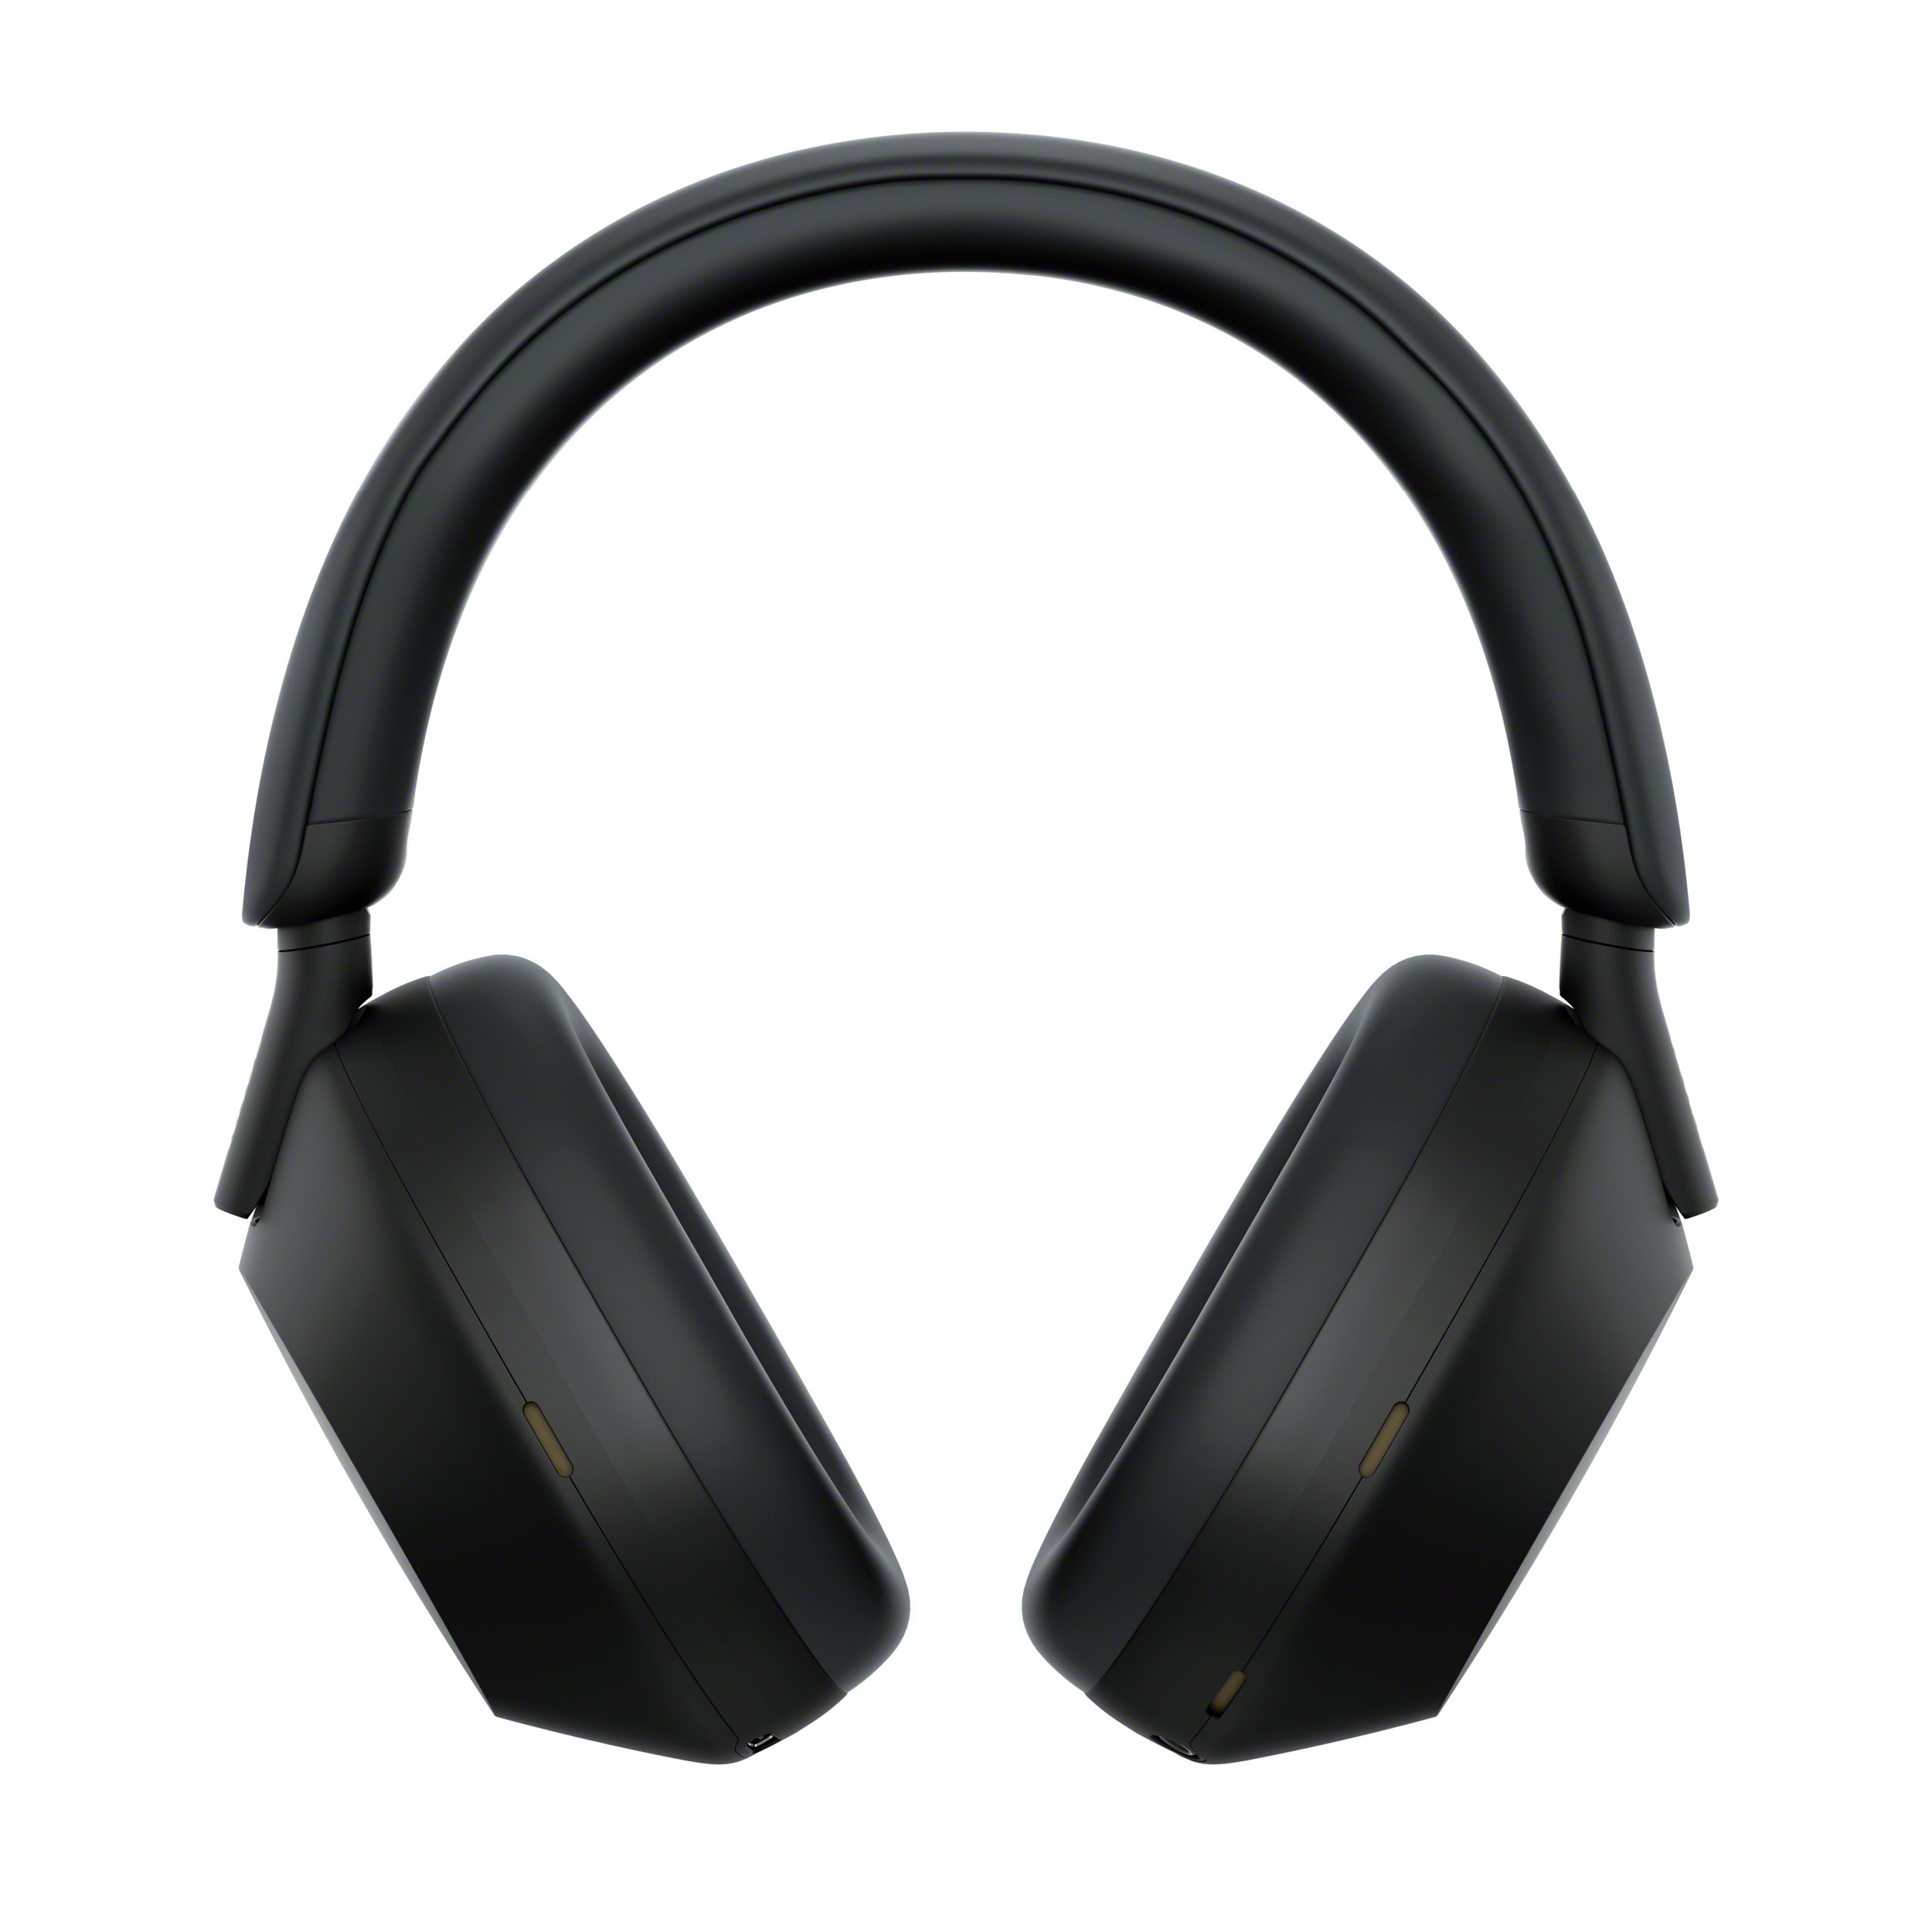 Sony WH-1000XM5 The Best Wireless Noise Canceling Headphones, Black - image 3 of 12